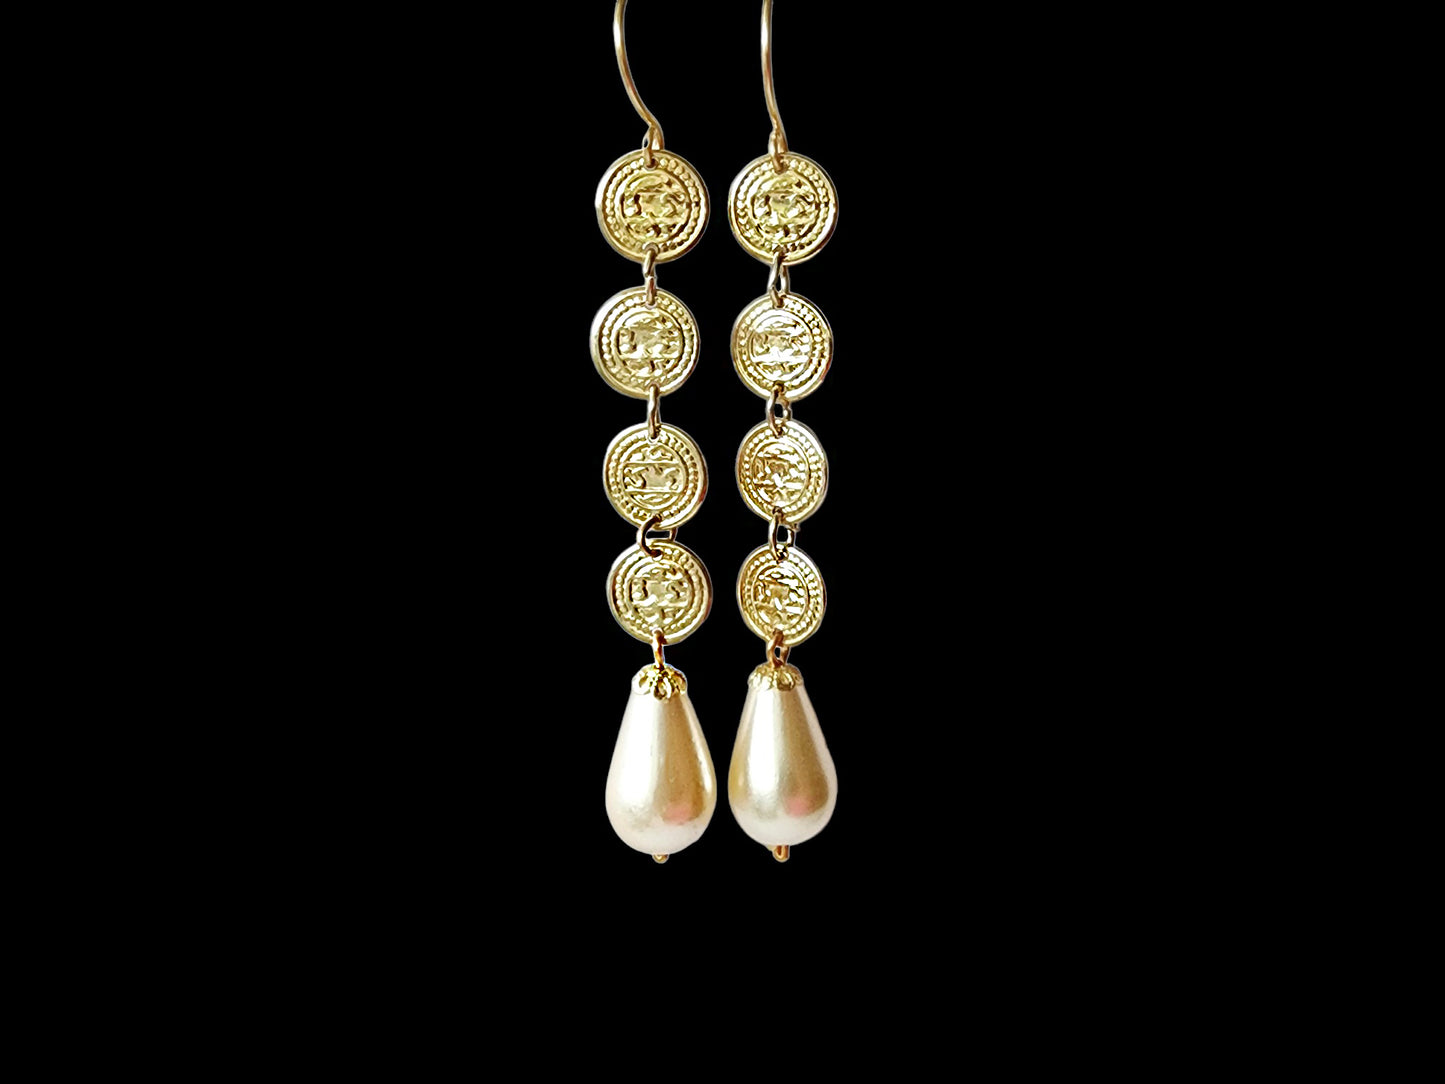 Boho Chic Long Coin Pearl Earrings, large white drop shaped cream color faux pearls dangle beneath a stream of four gold coils. 